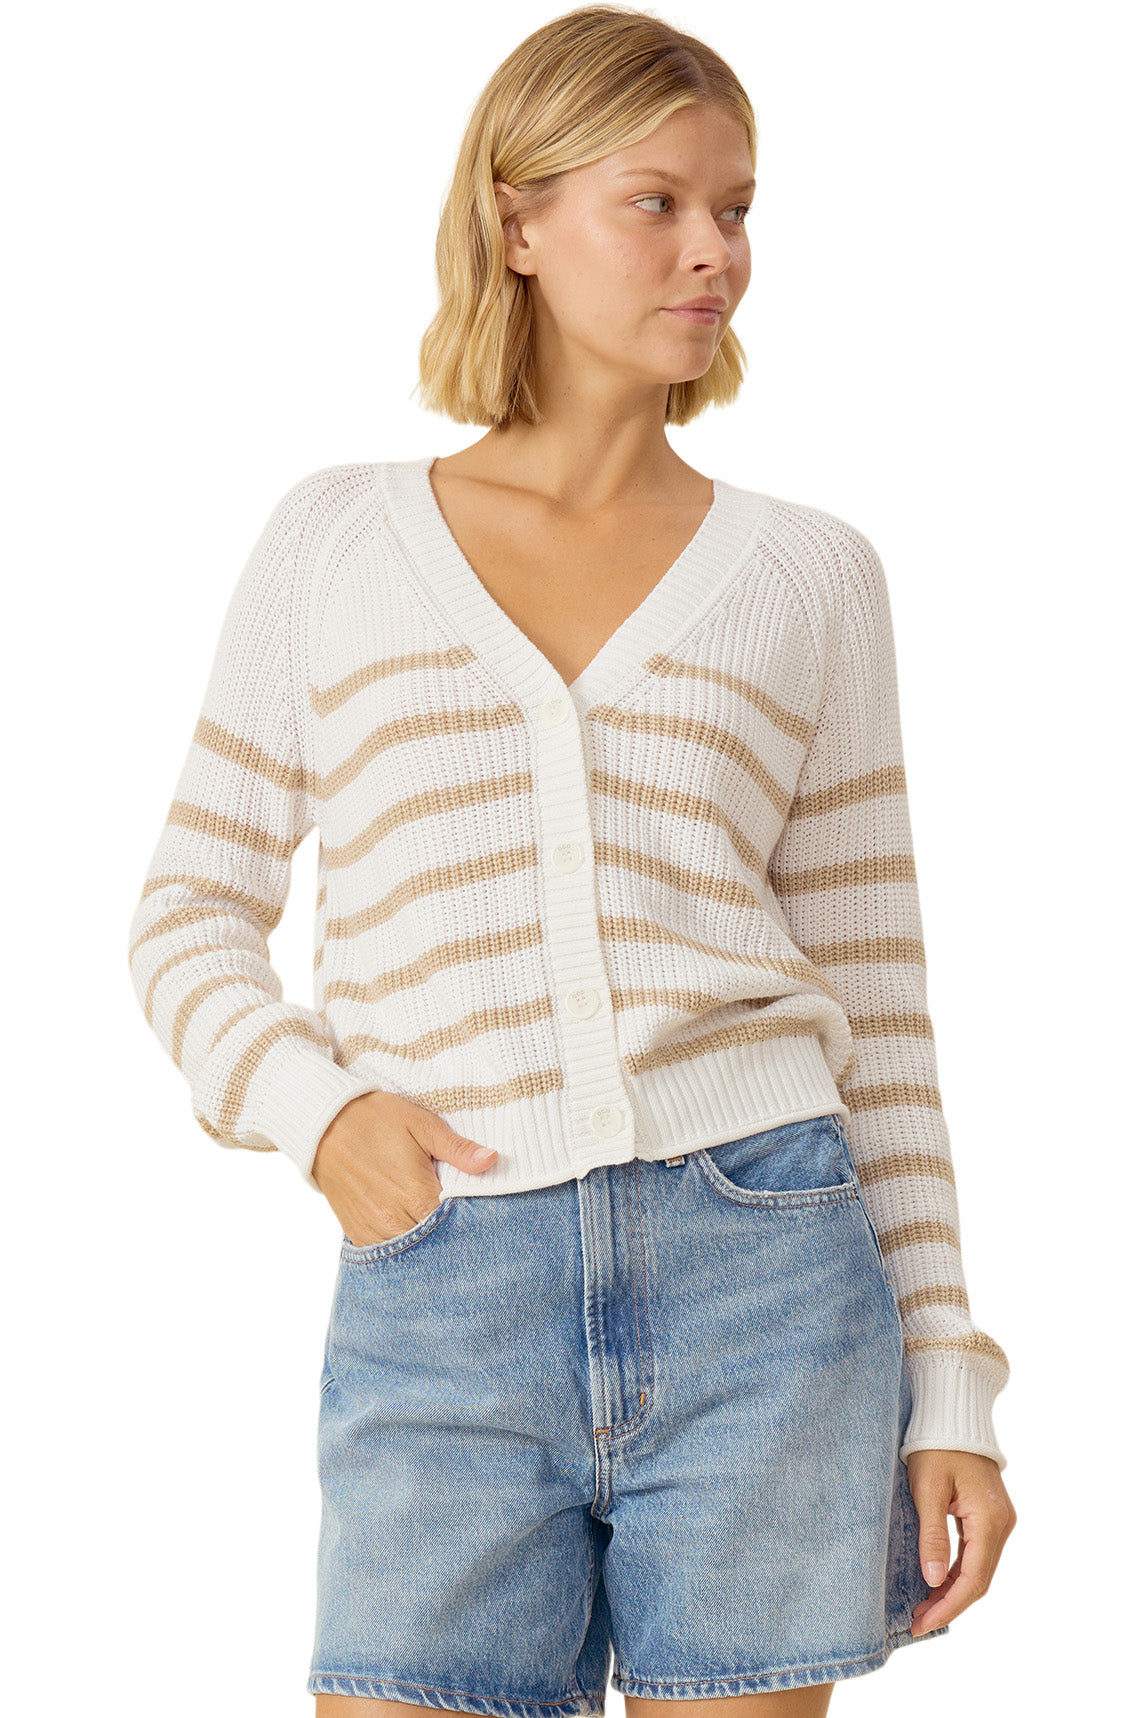 One Grey Day Raleigh Cardigan in Ivory Combo